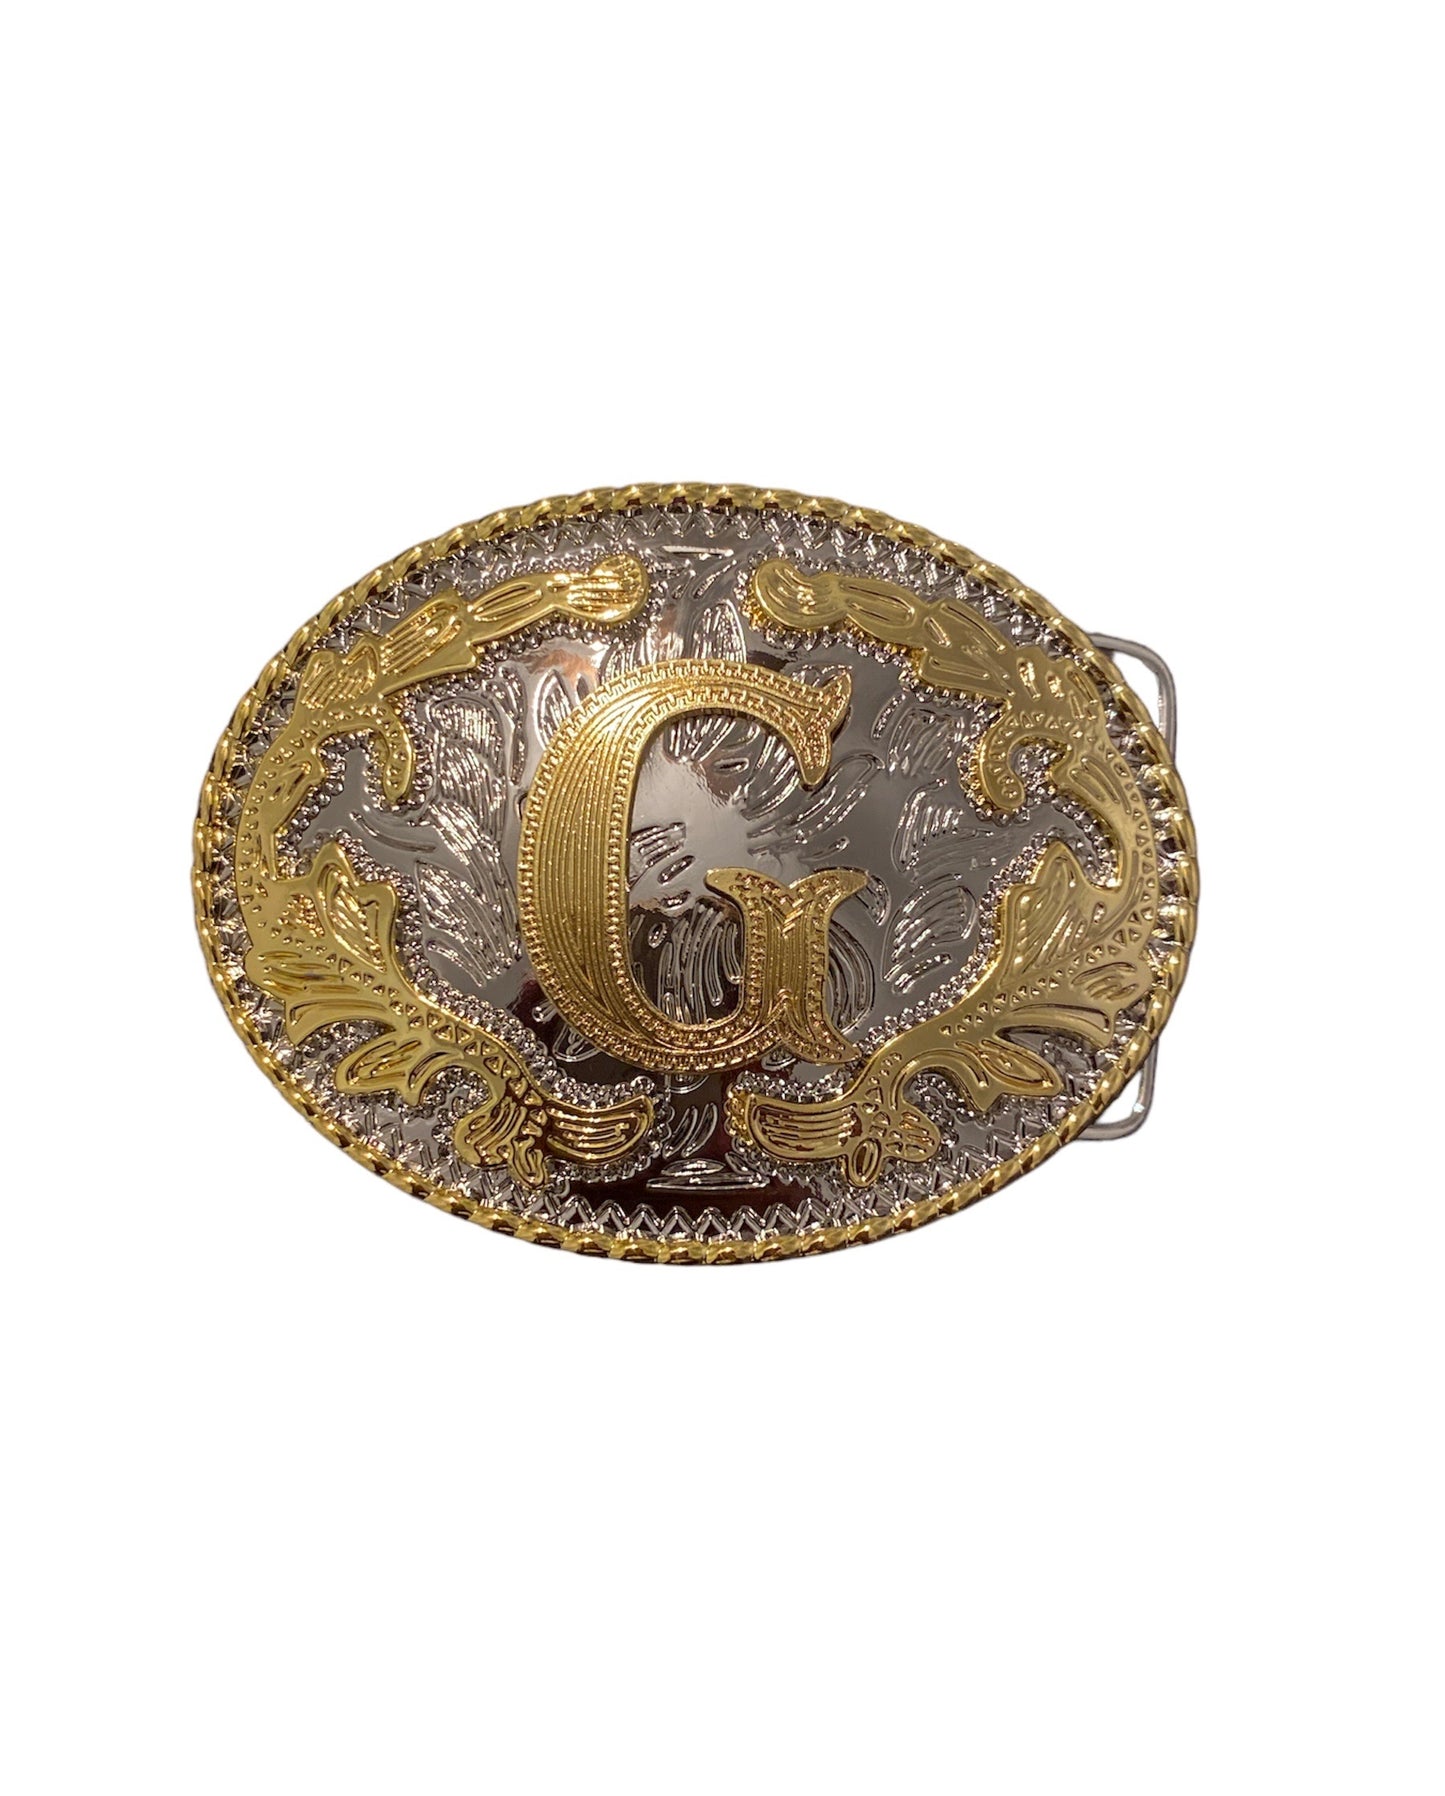 Initial Letter "G" Cowboy Rodeo Western Large Gold Tone Belt Buckle